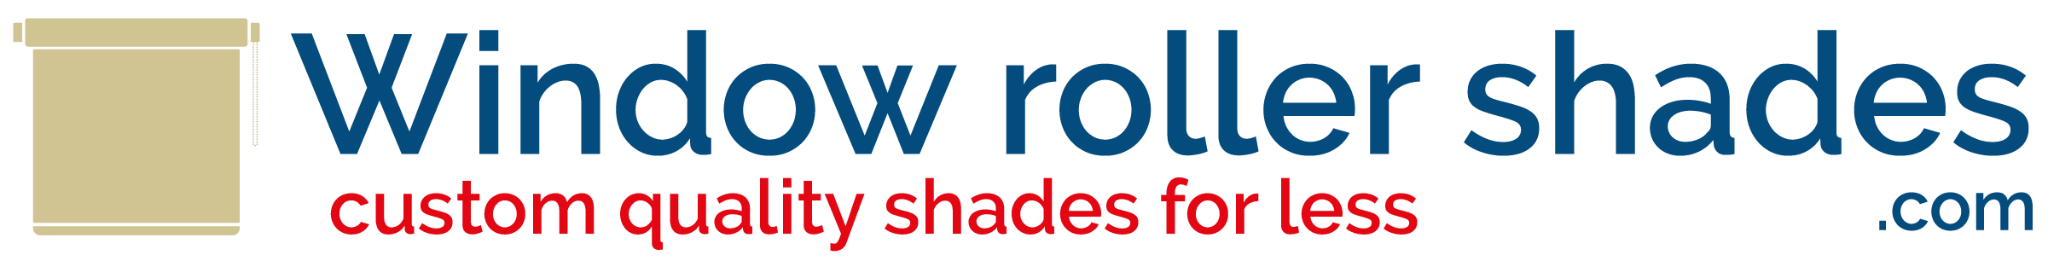 Bryce Foster Announces The Expansion of Windows Roller Shades in the United States.